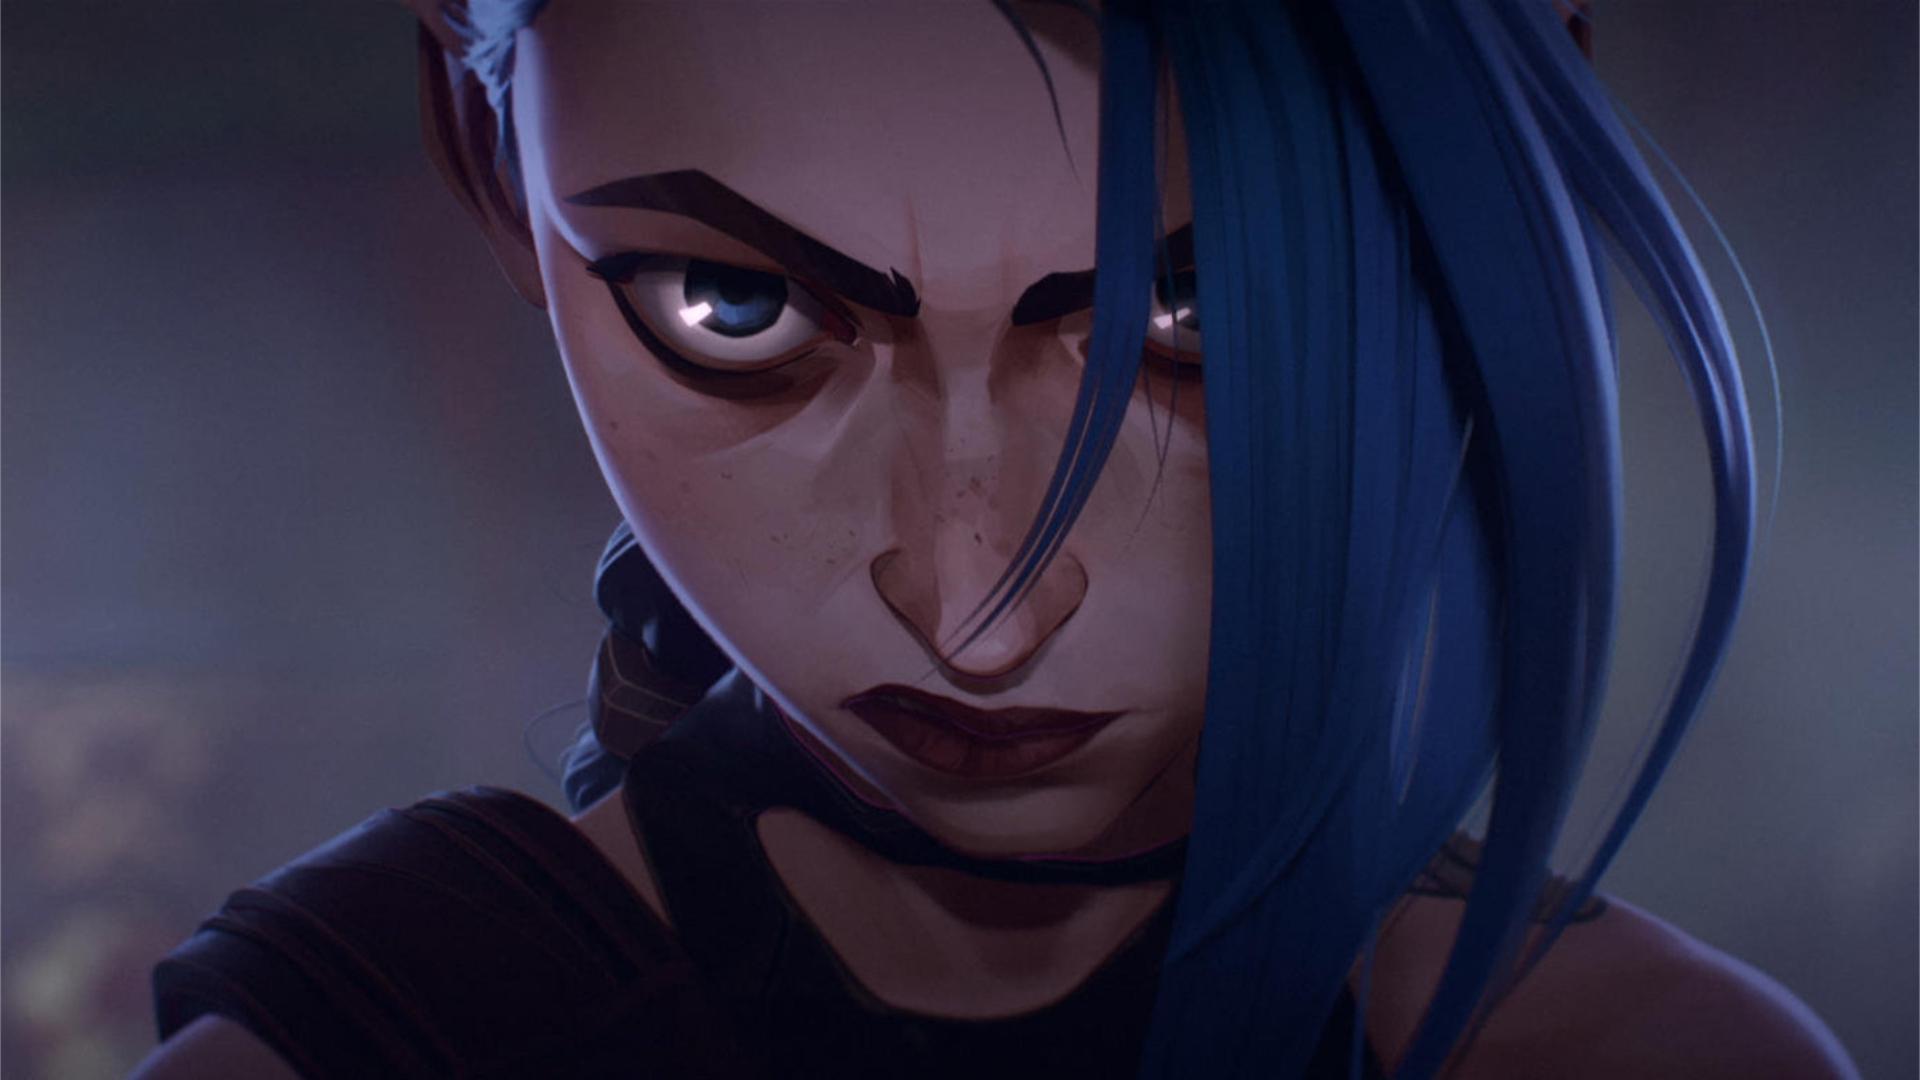 The release date for League of Legends Arcane is in November